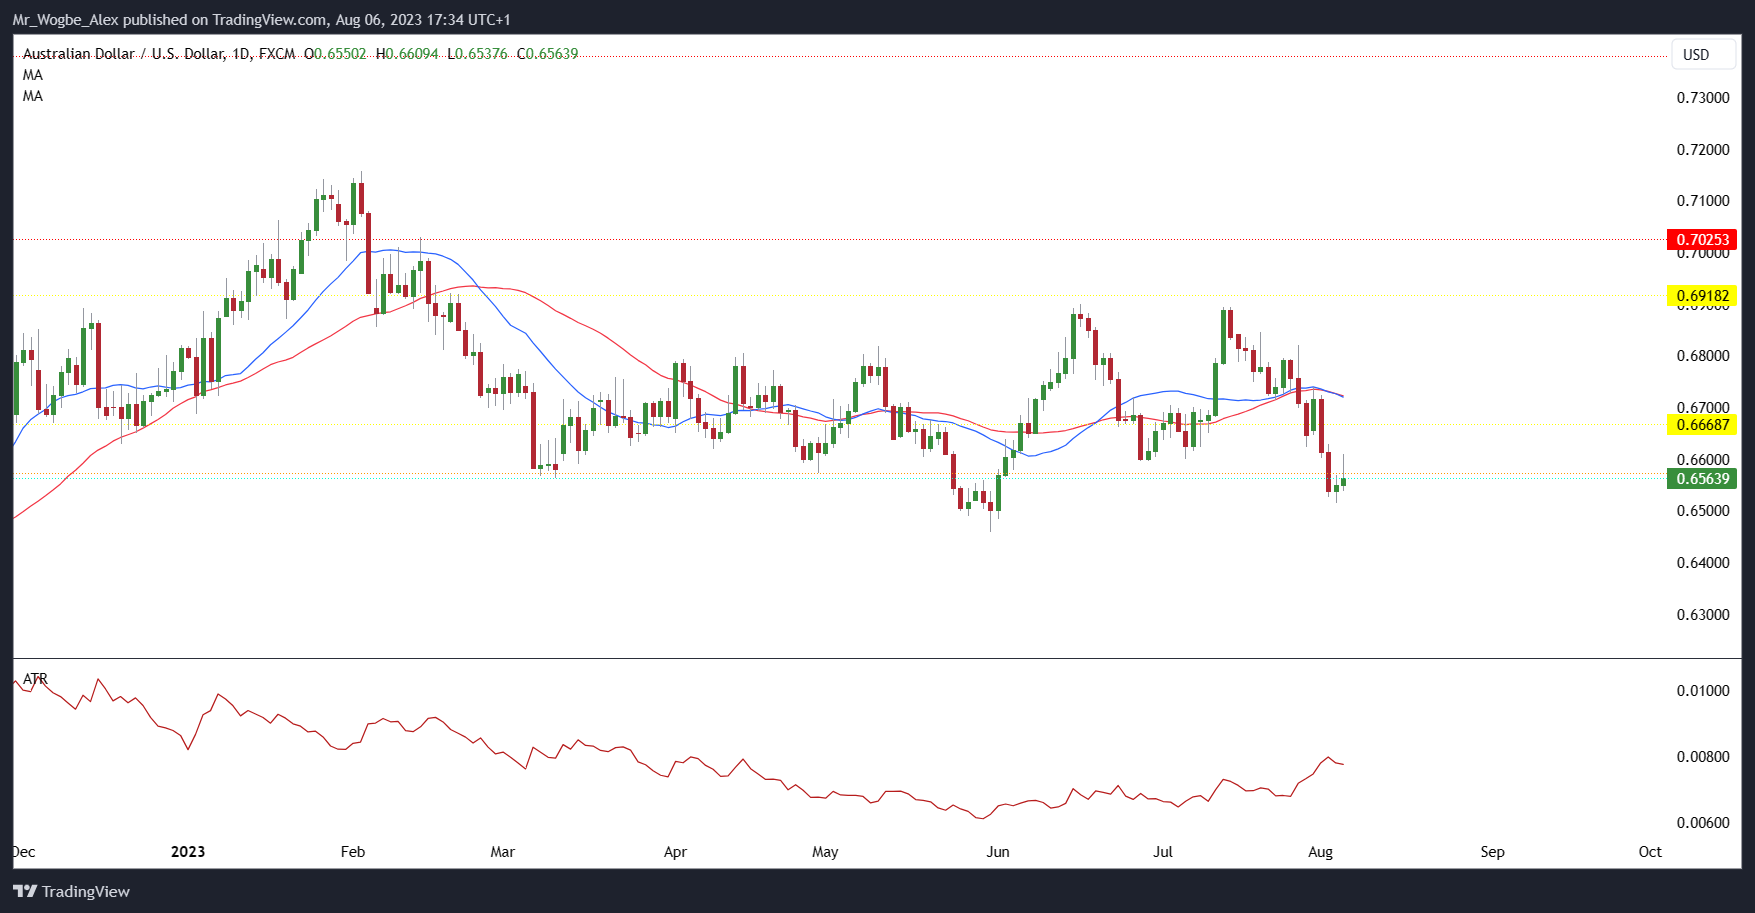 AUD/USD Daily Chart from TradingView